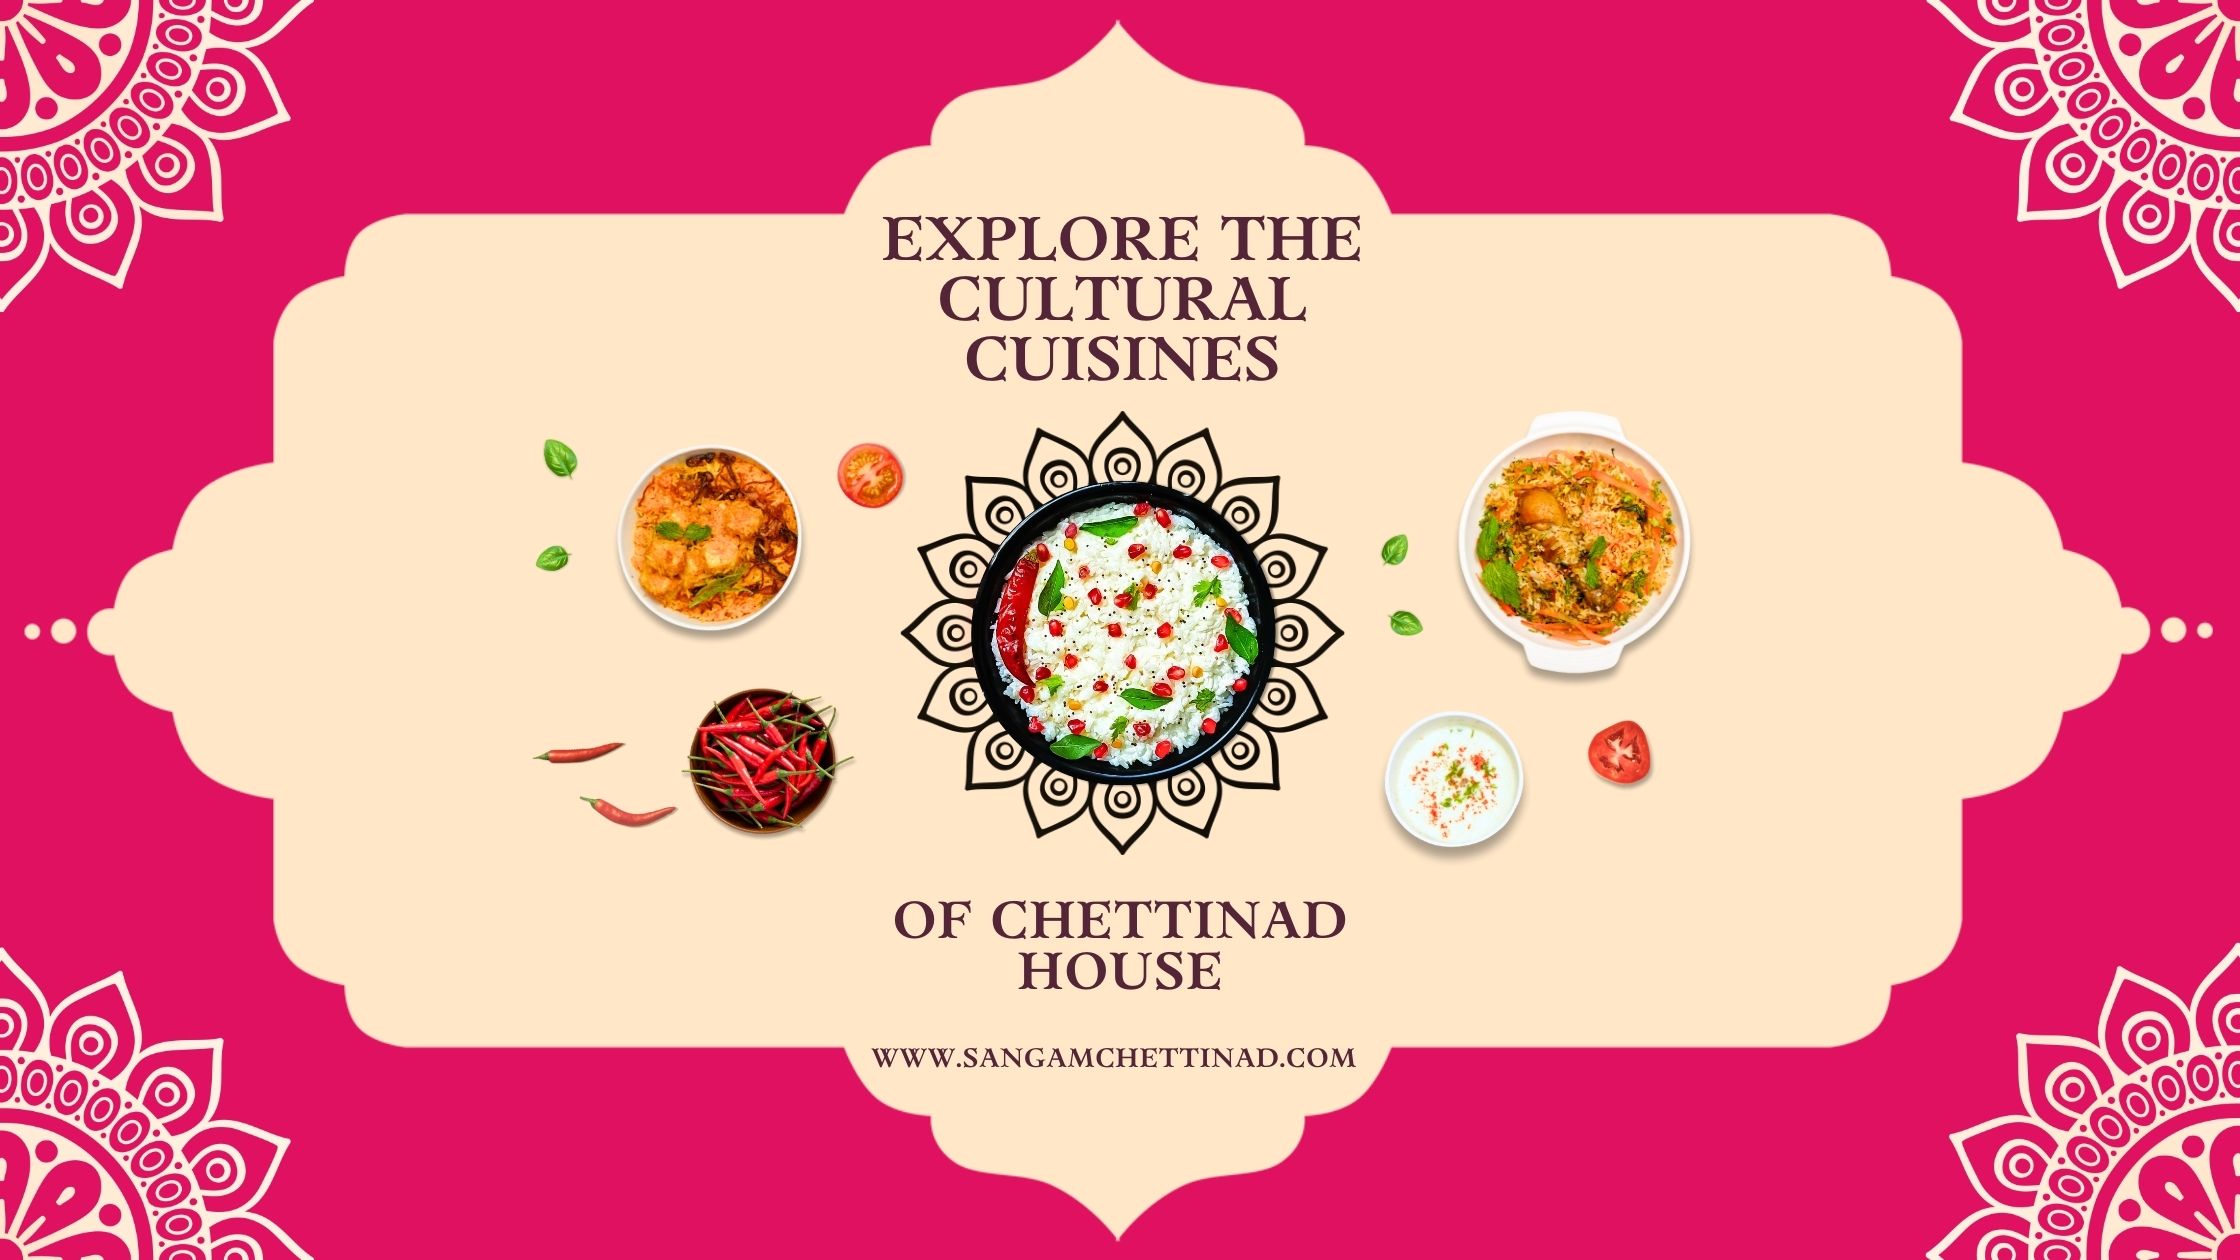 Explore The Cultural Cuisines Of Chettinad House